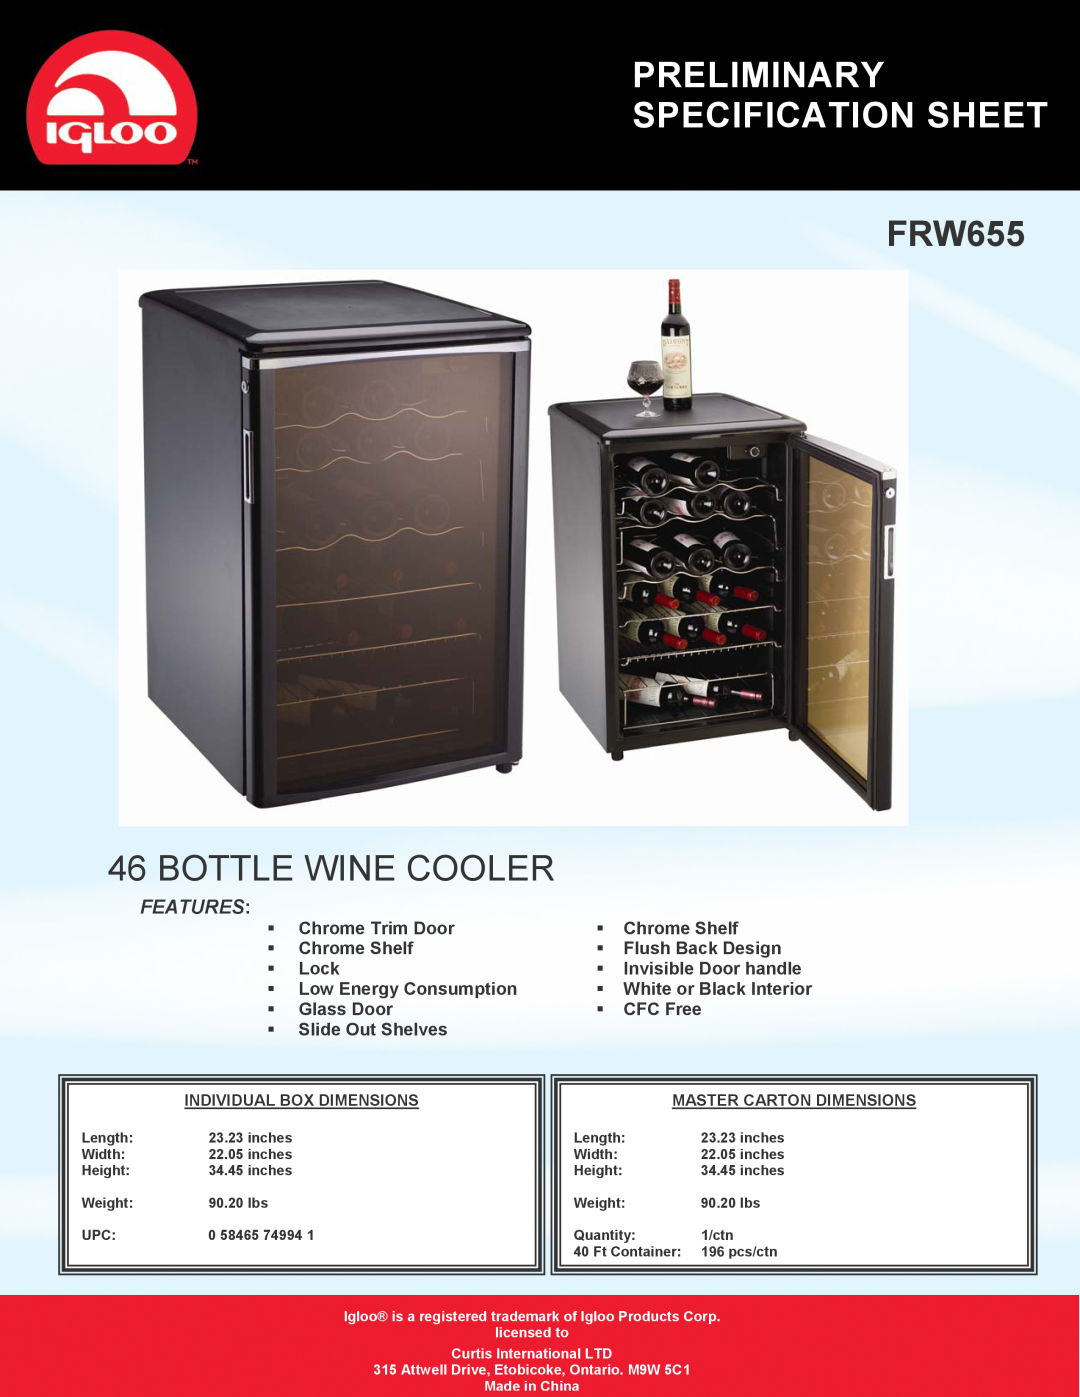 Igloo FRW655 specifications Preliminary Specification Sheet, Bottle Wine Cooler, Features 